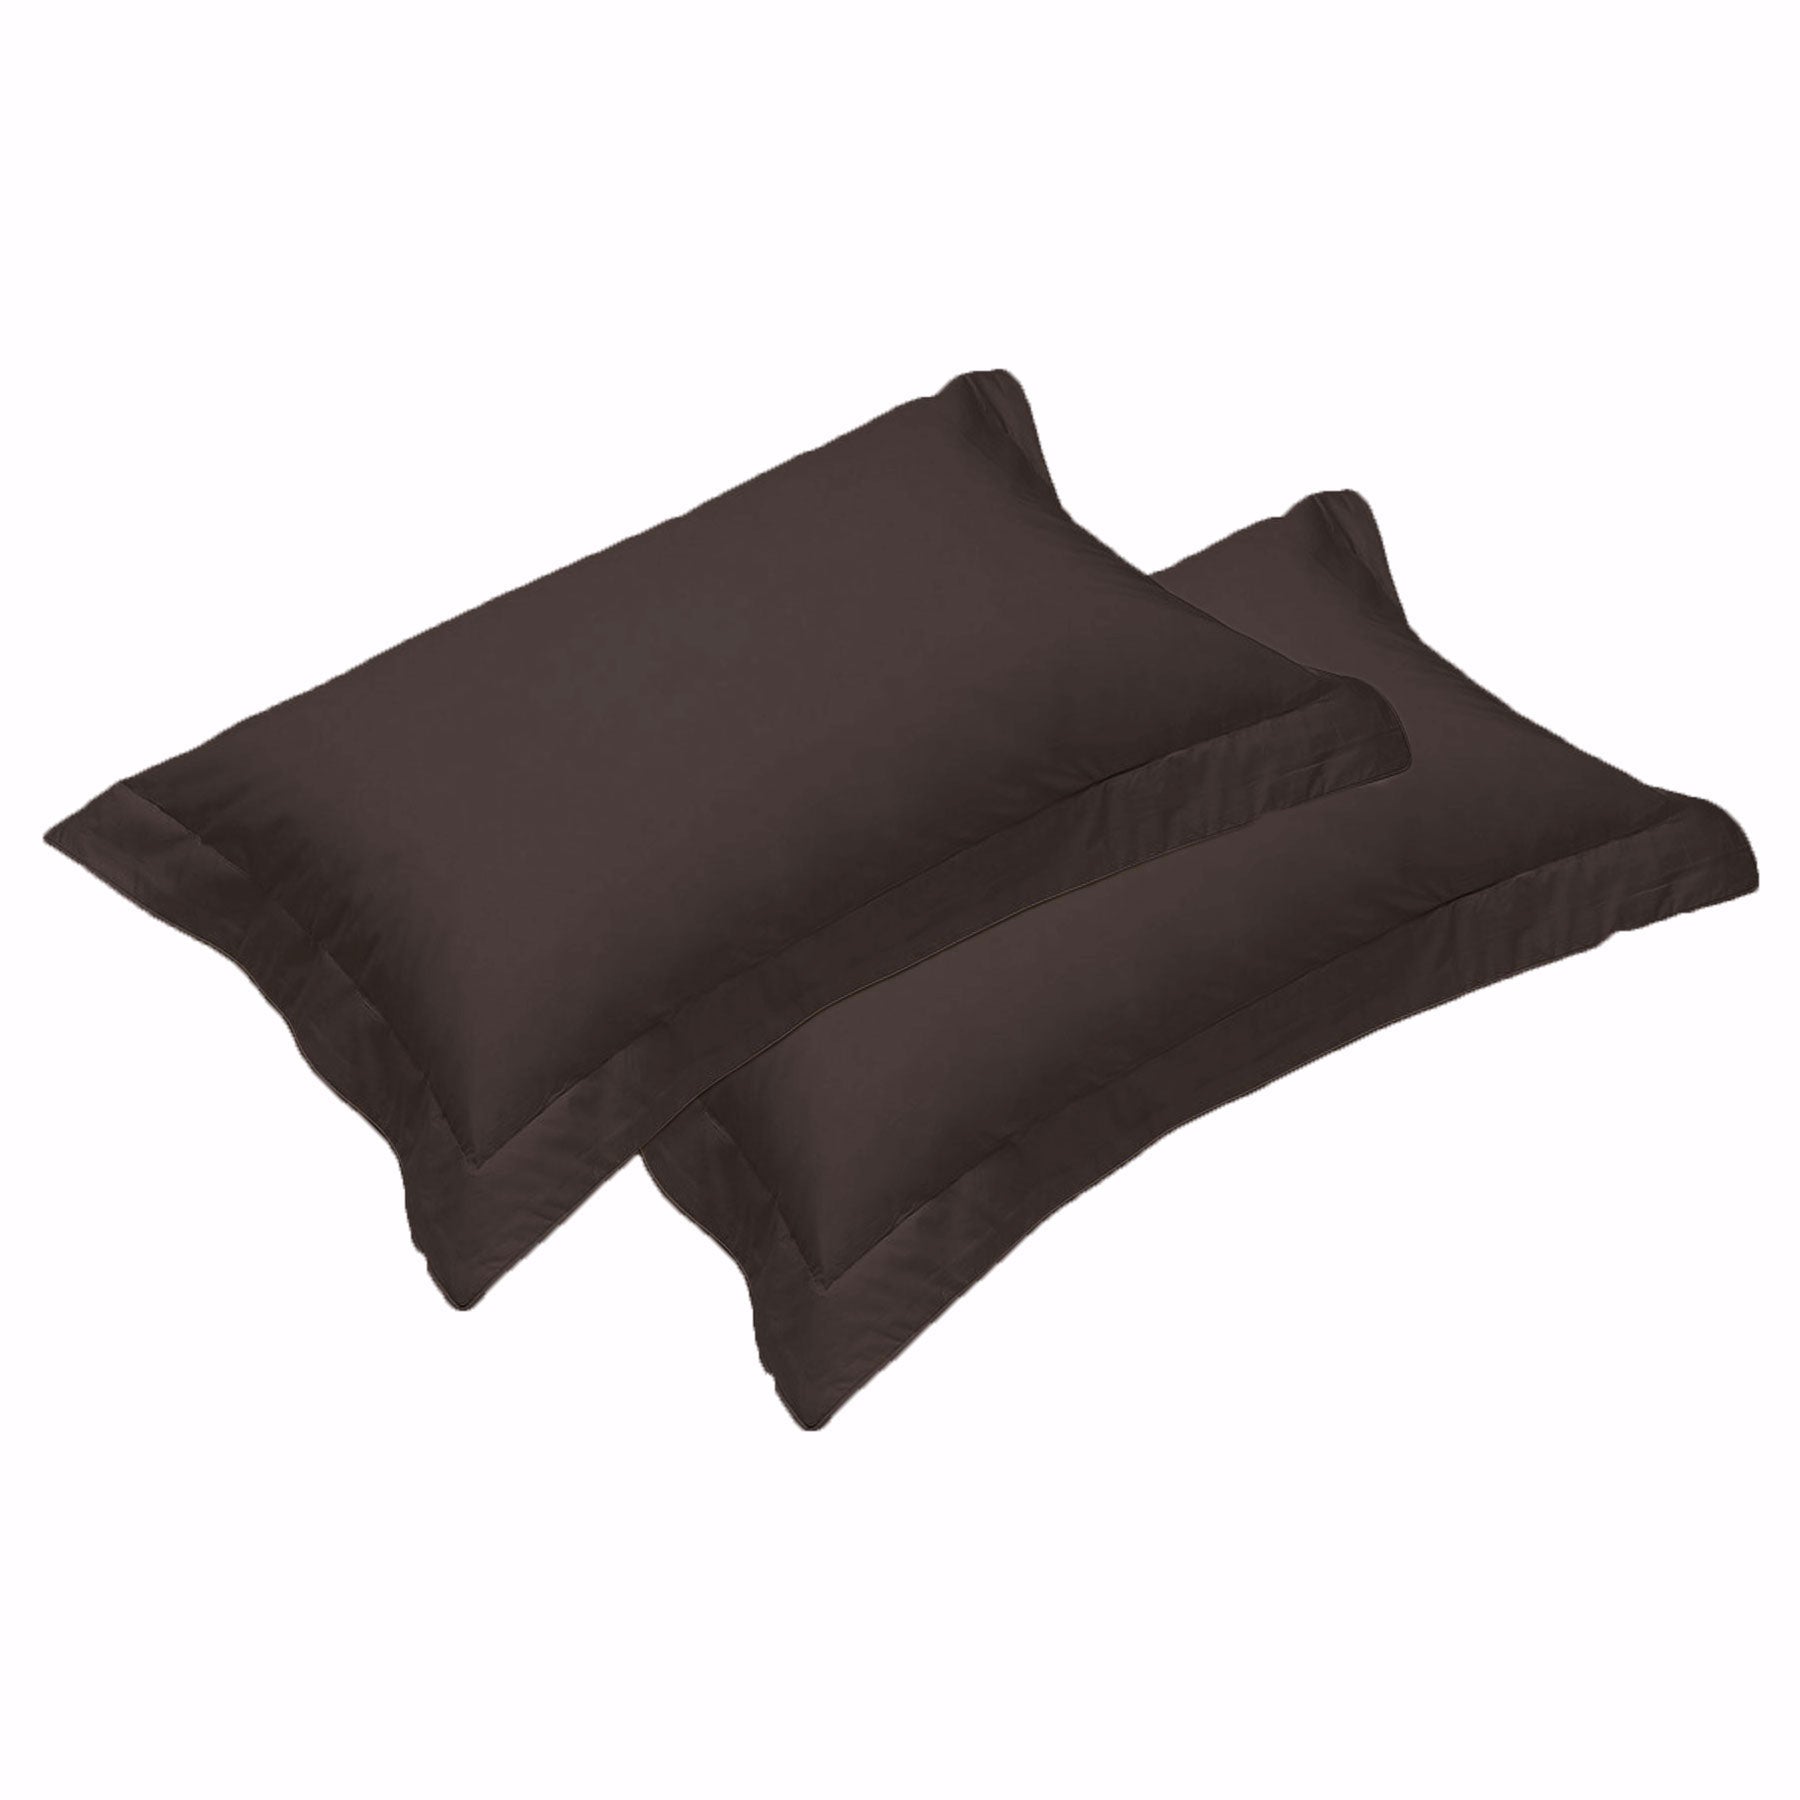 500TC Pair of Egyptian Cotton Tailored Standard Pillowcases Chocolate